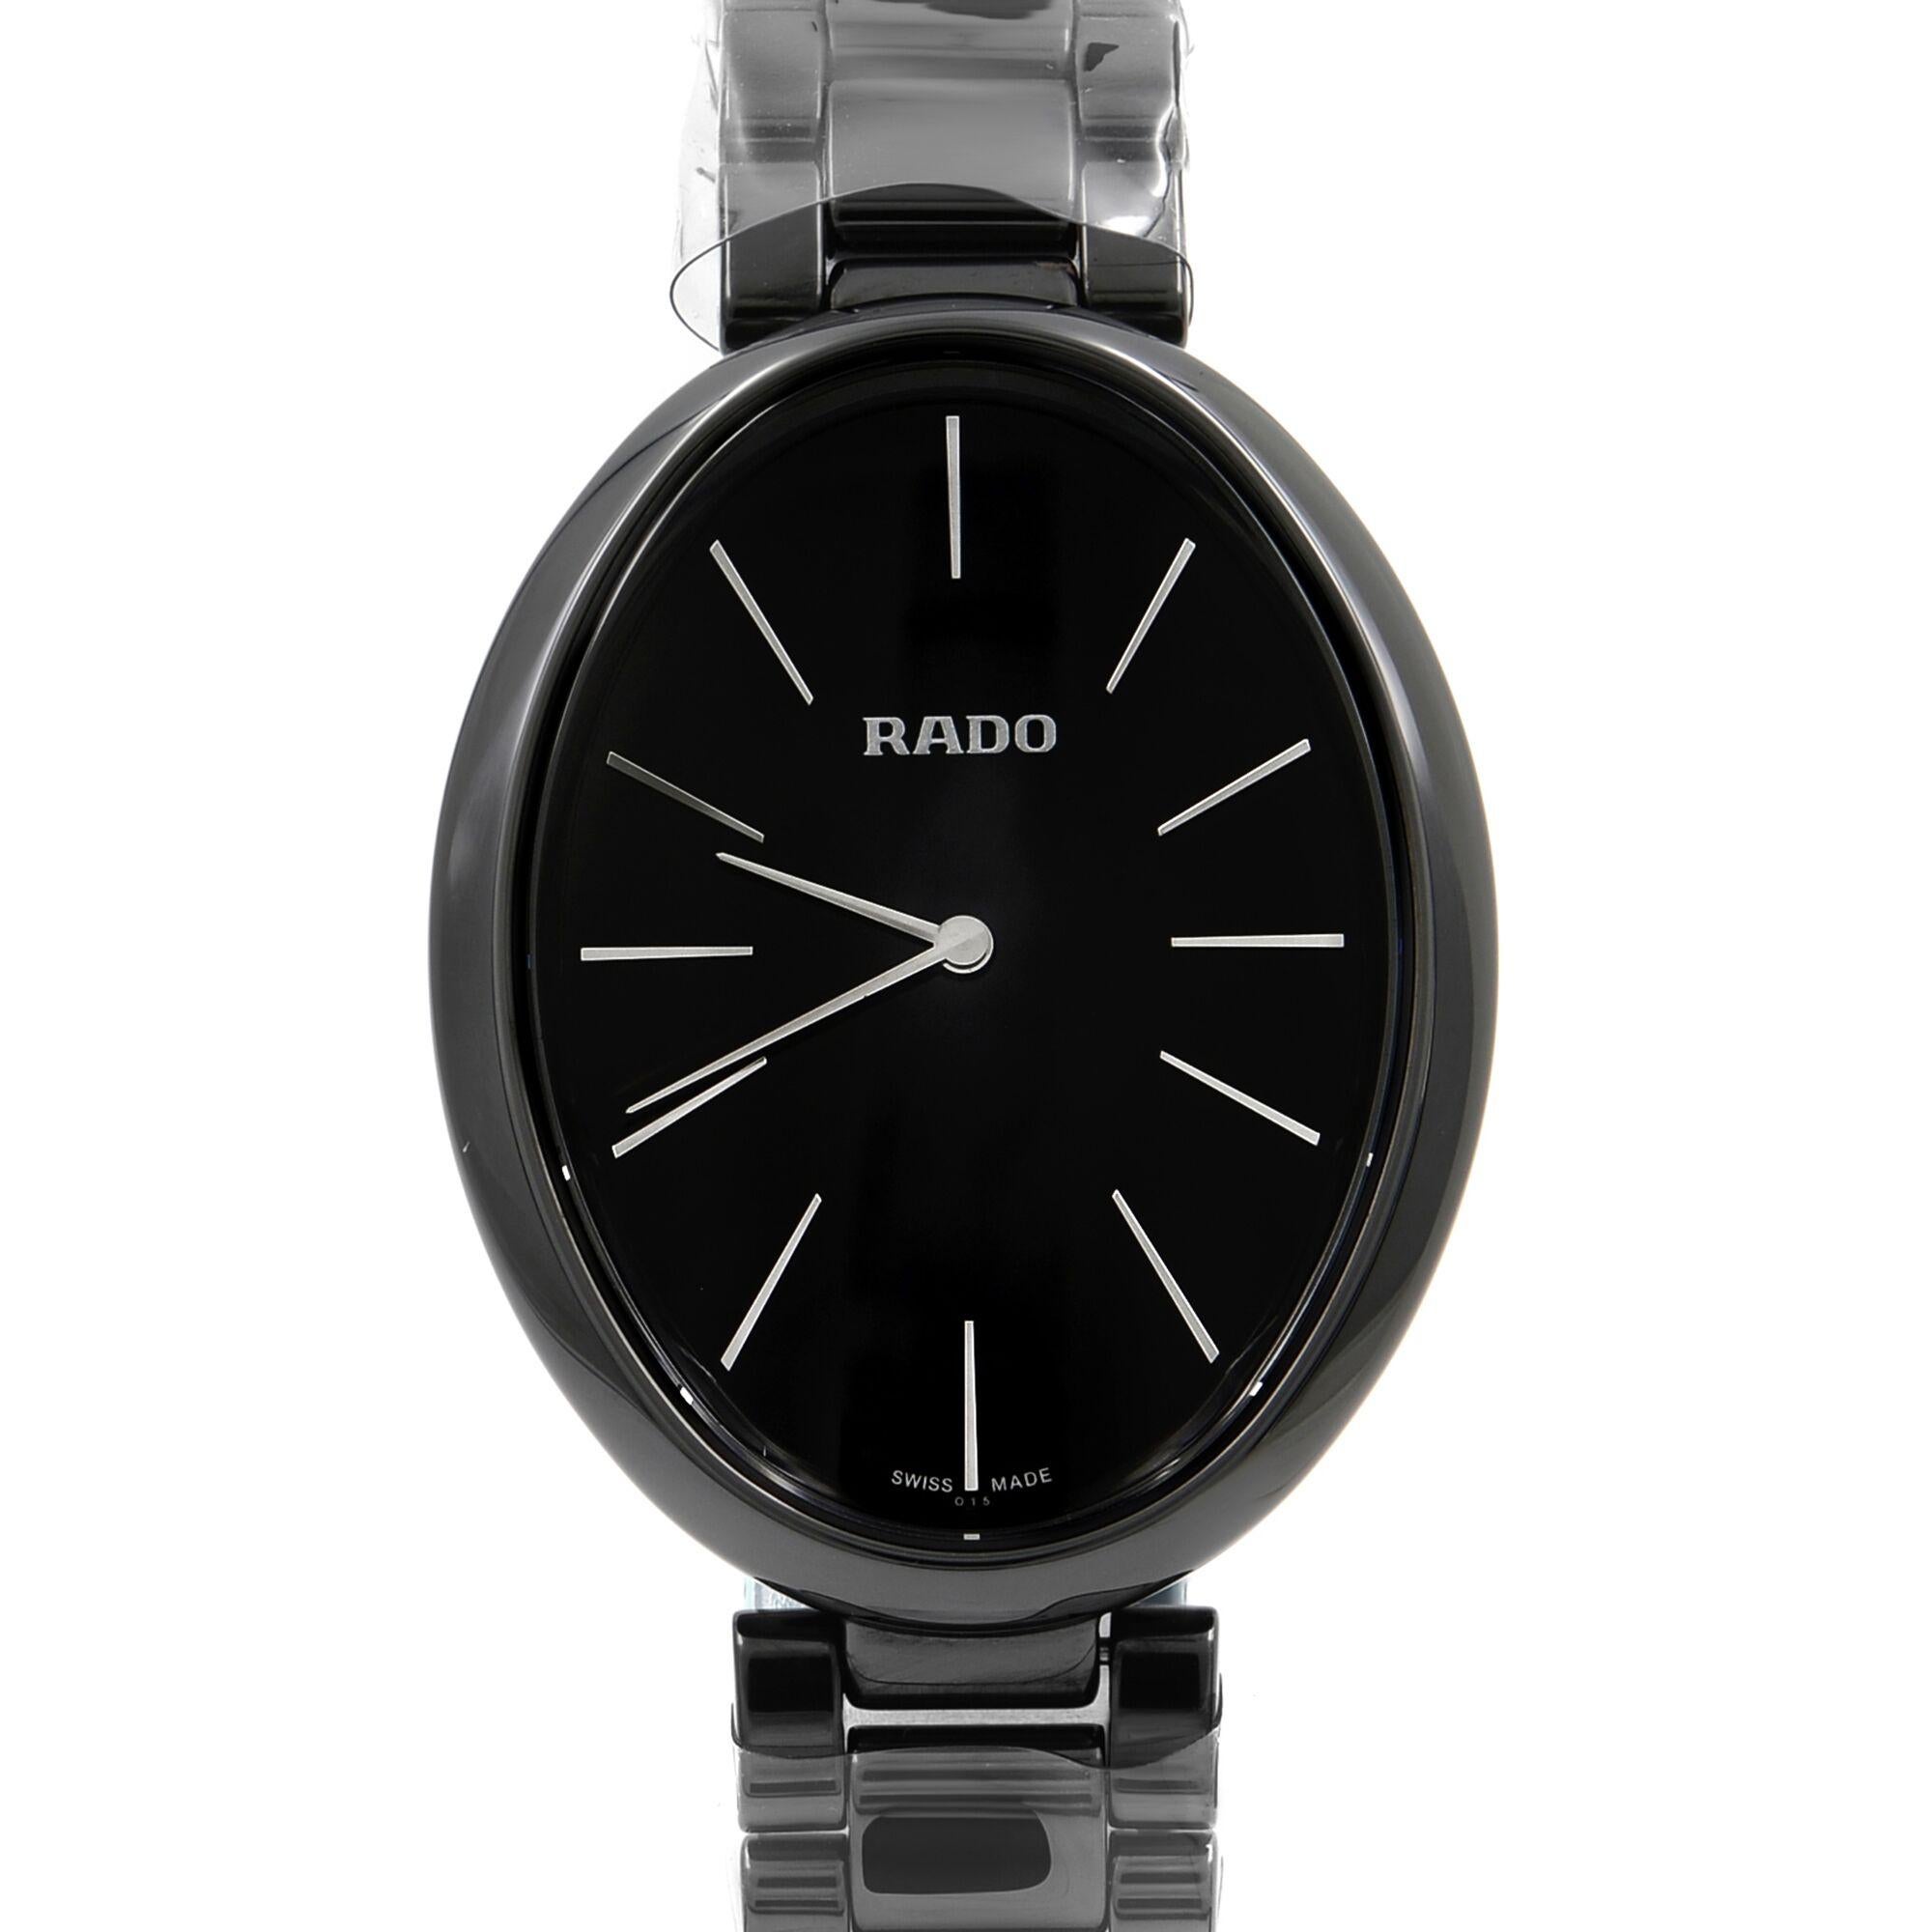 This brand new Rado Esenza R53093152 is a beautiful Ladie's timepiece that is powered by quartz (battery) movement which is cased in a ceramic case. It has a oval shape face,  dial and has hand sticks style markers. It is completed with a ceramic